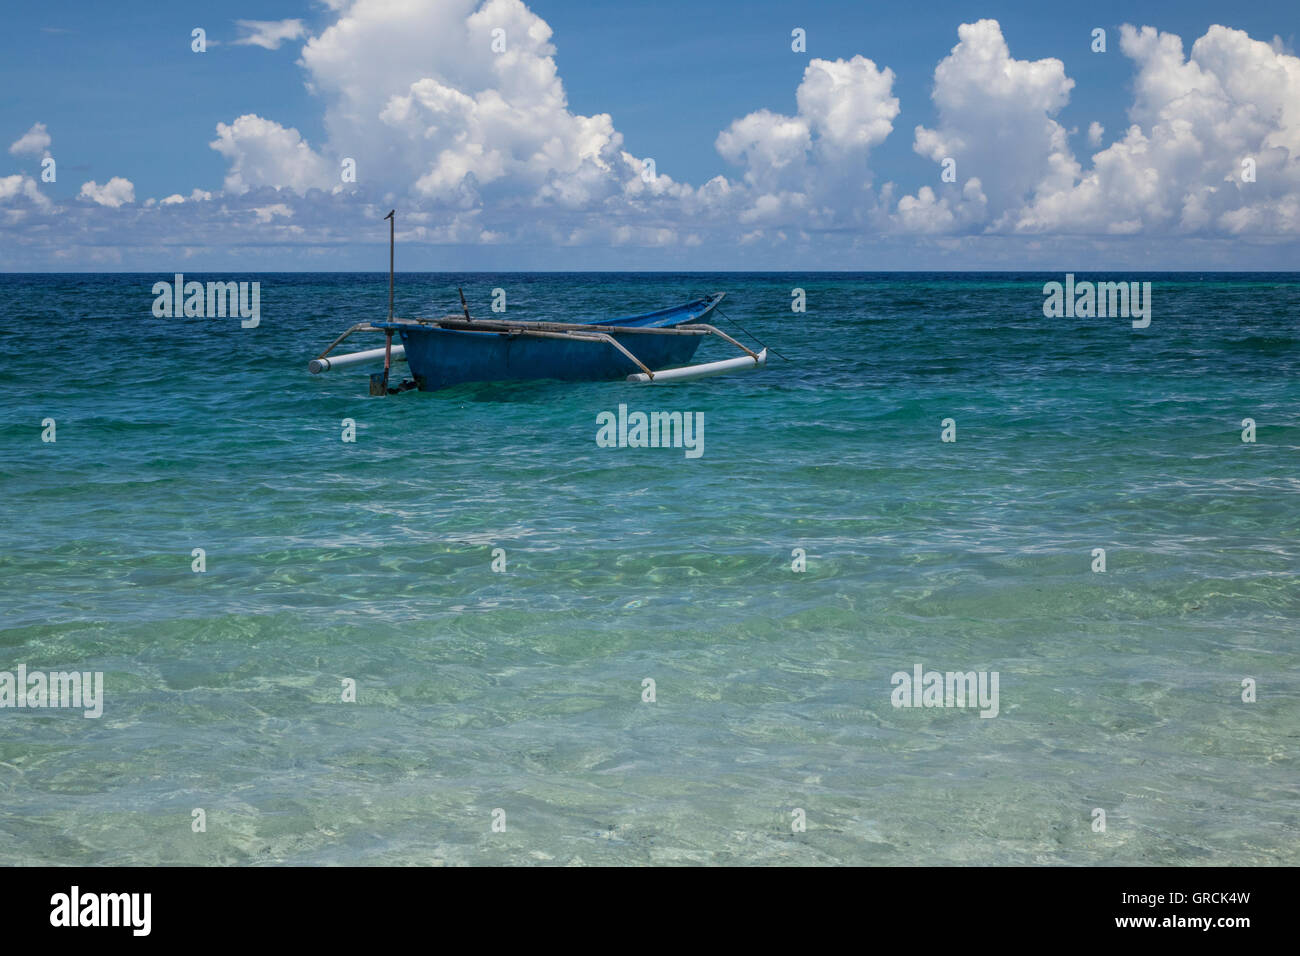 Indonesian Outrigger Canoe Near The Beach, White Cumulus Clouds And Blue Sky In The Background Stock Photo